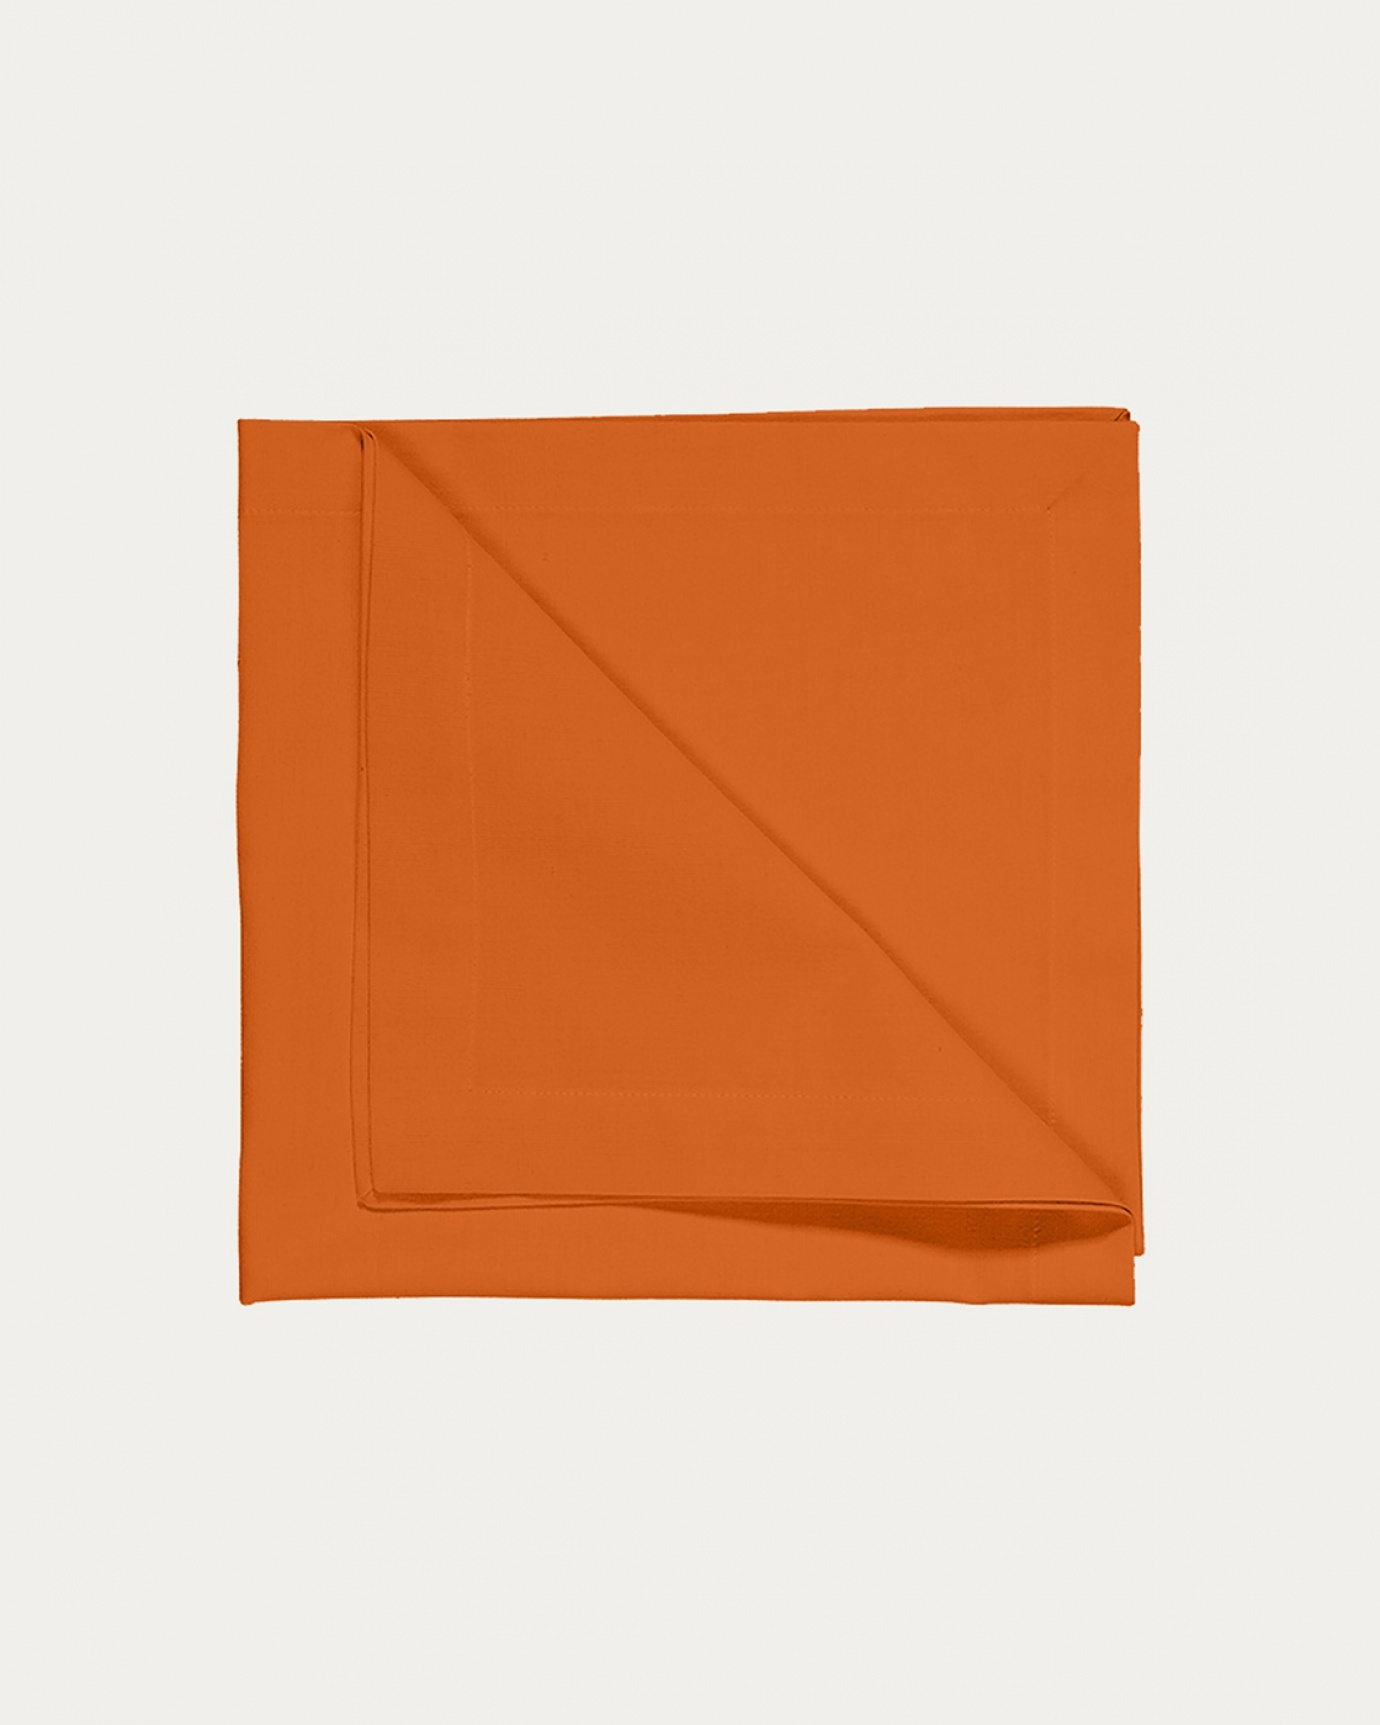 Product image orange ROBERT napkin made of soft cotton from LINUM DESIGN. Size 45x45 cm and sold in 4-pack.